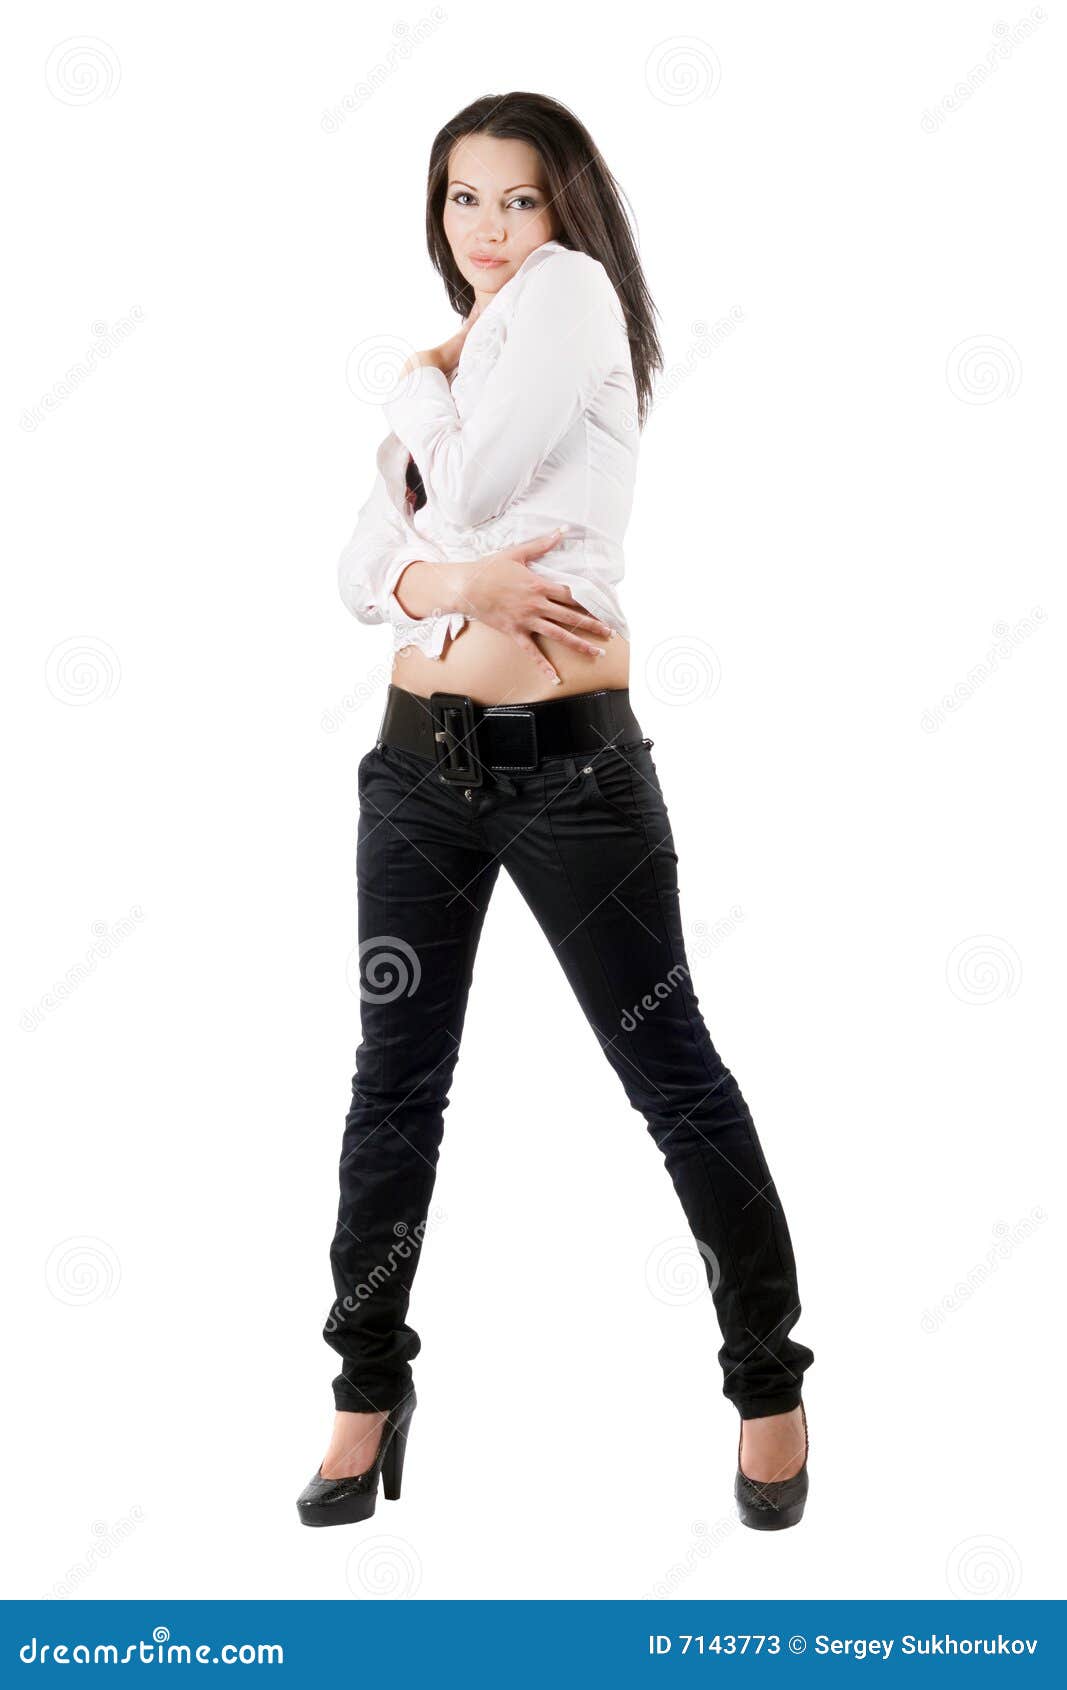 The Young Woman in Black Jeans Stock Image - Image of isolated ...